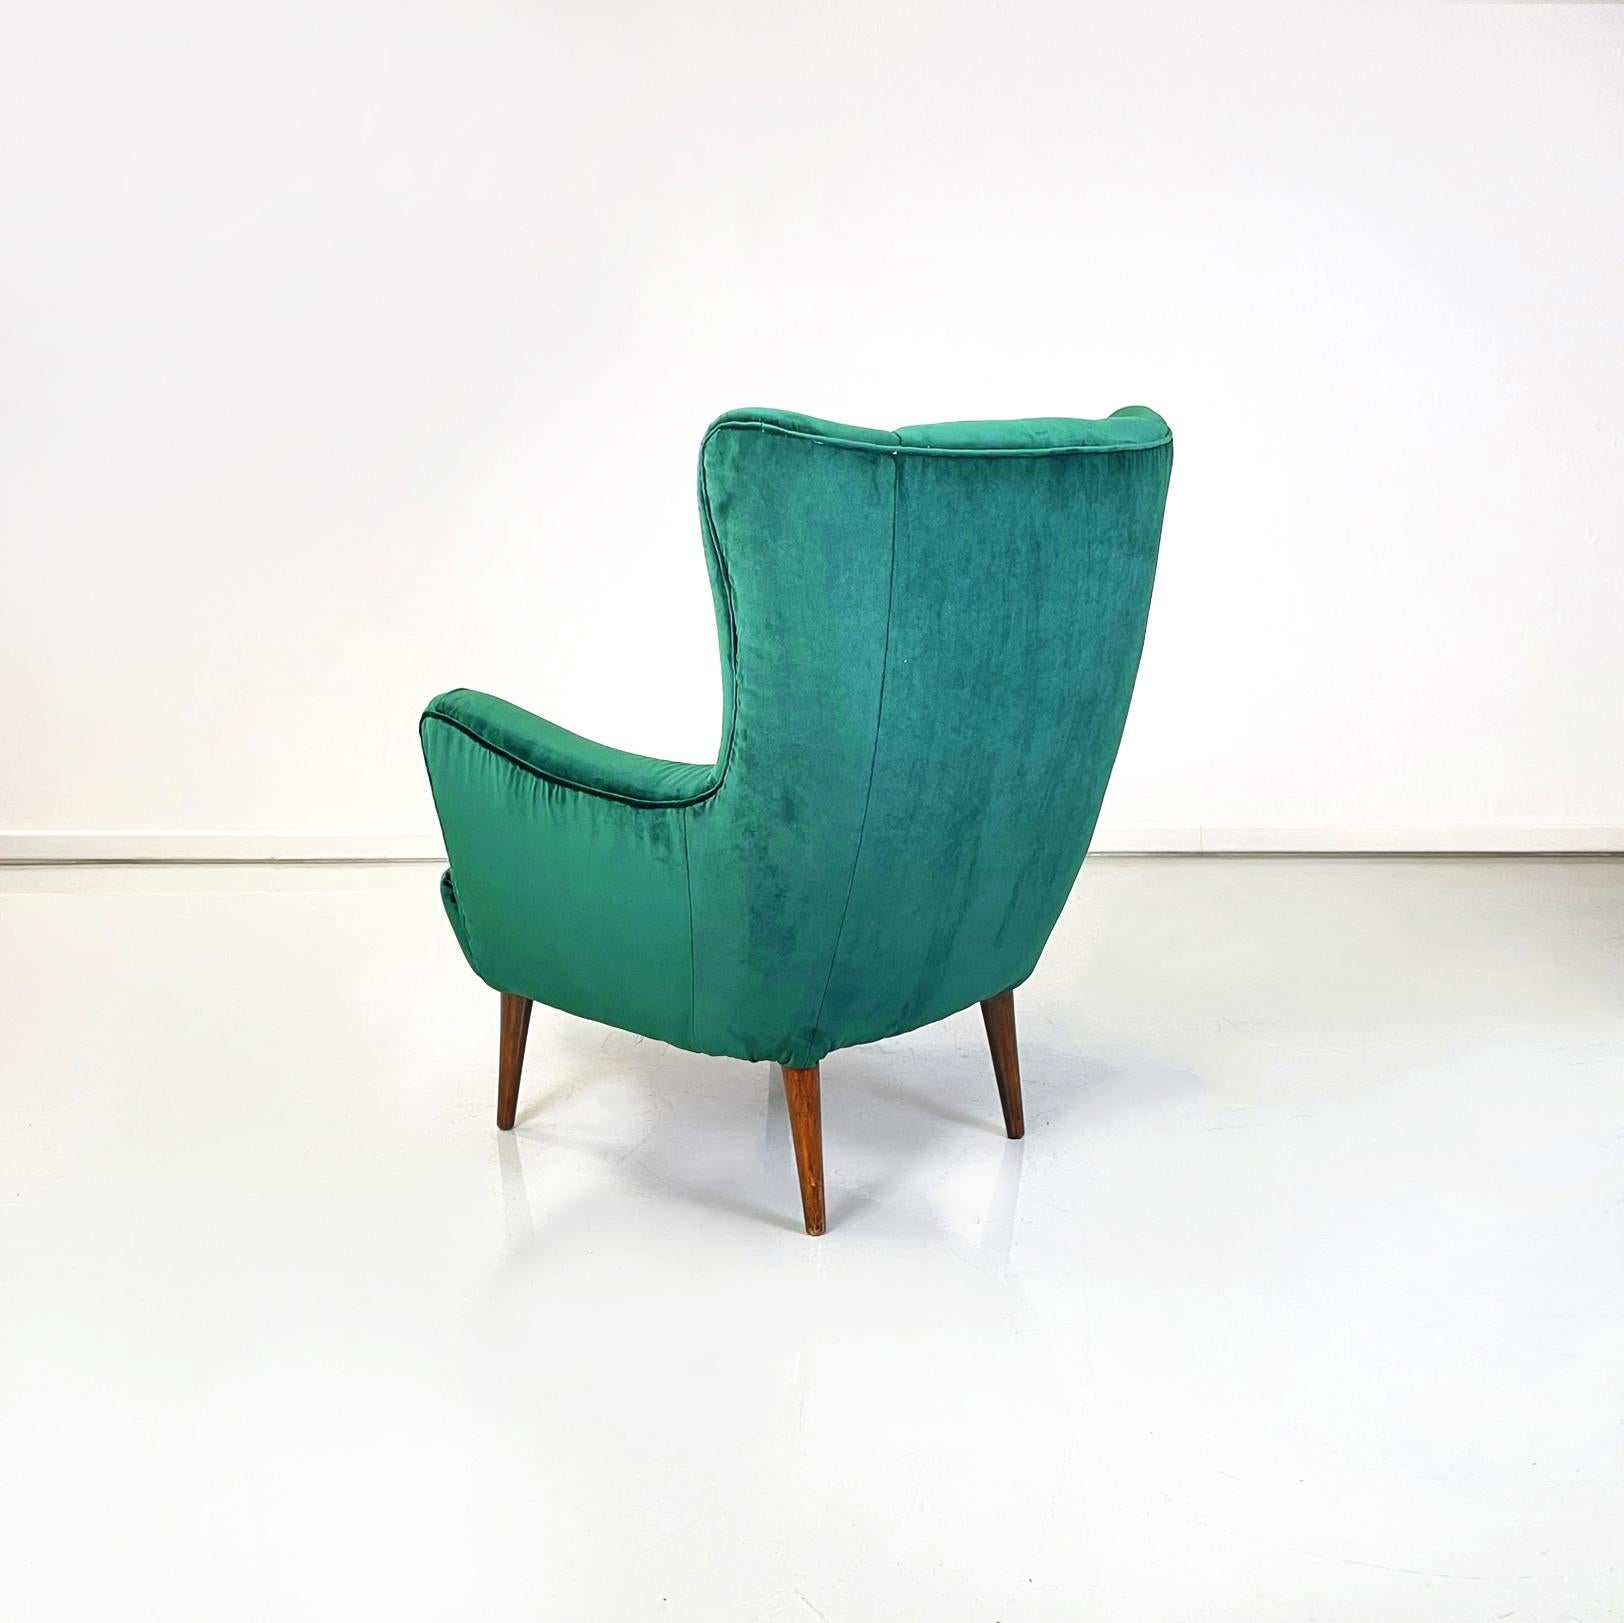 Italian Mid-Century Armchairs in Forest Green Velvet and Wooden Legs, 1950s In Good Condition For Sale In MIlano, IT